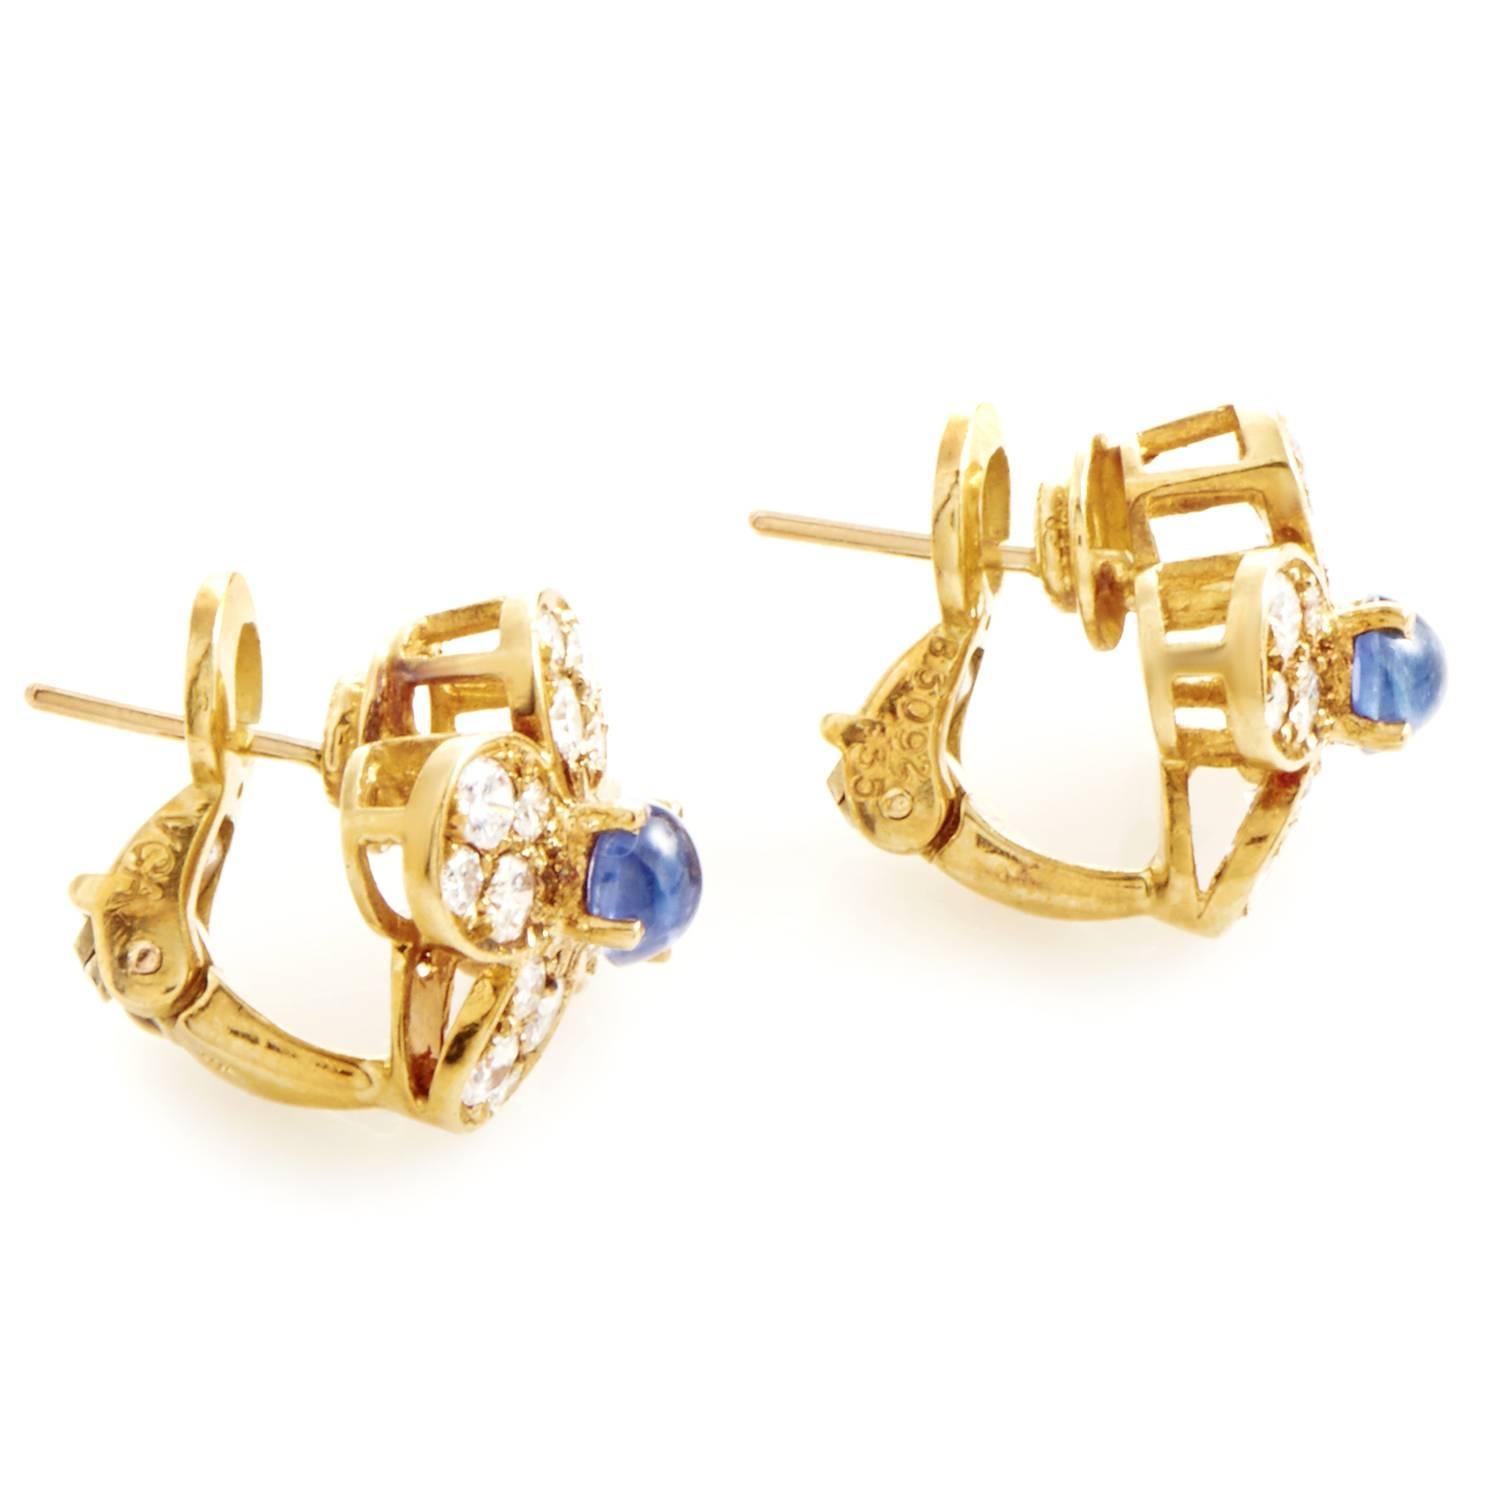 Spellbinding floral décor is created by combining the fabulous radiance of 18K yellow gold, charming brilliance of diamonds totaling 1.25 carats and splendid color of the magnificent sapphires amounting to 0.60ct in these enchanting earrings from